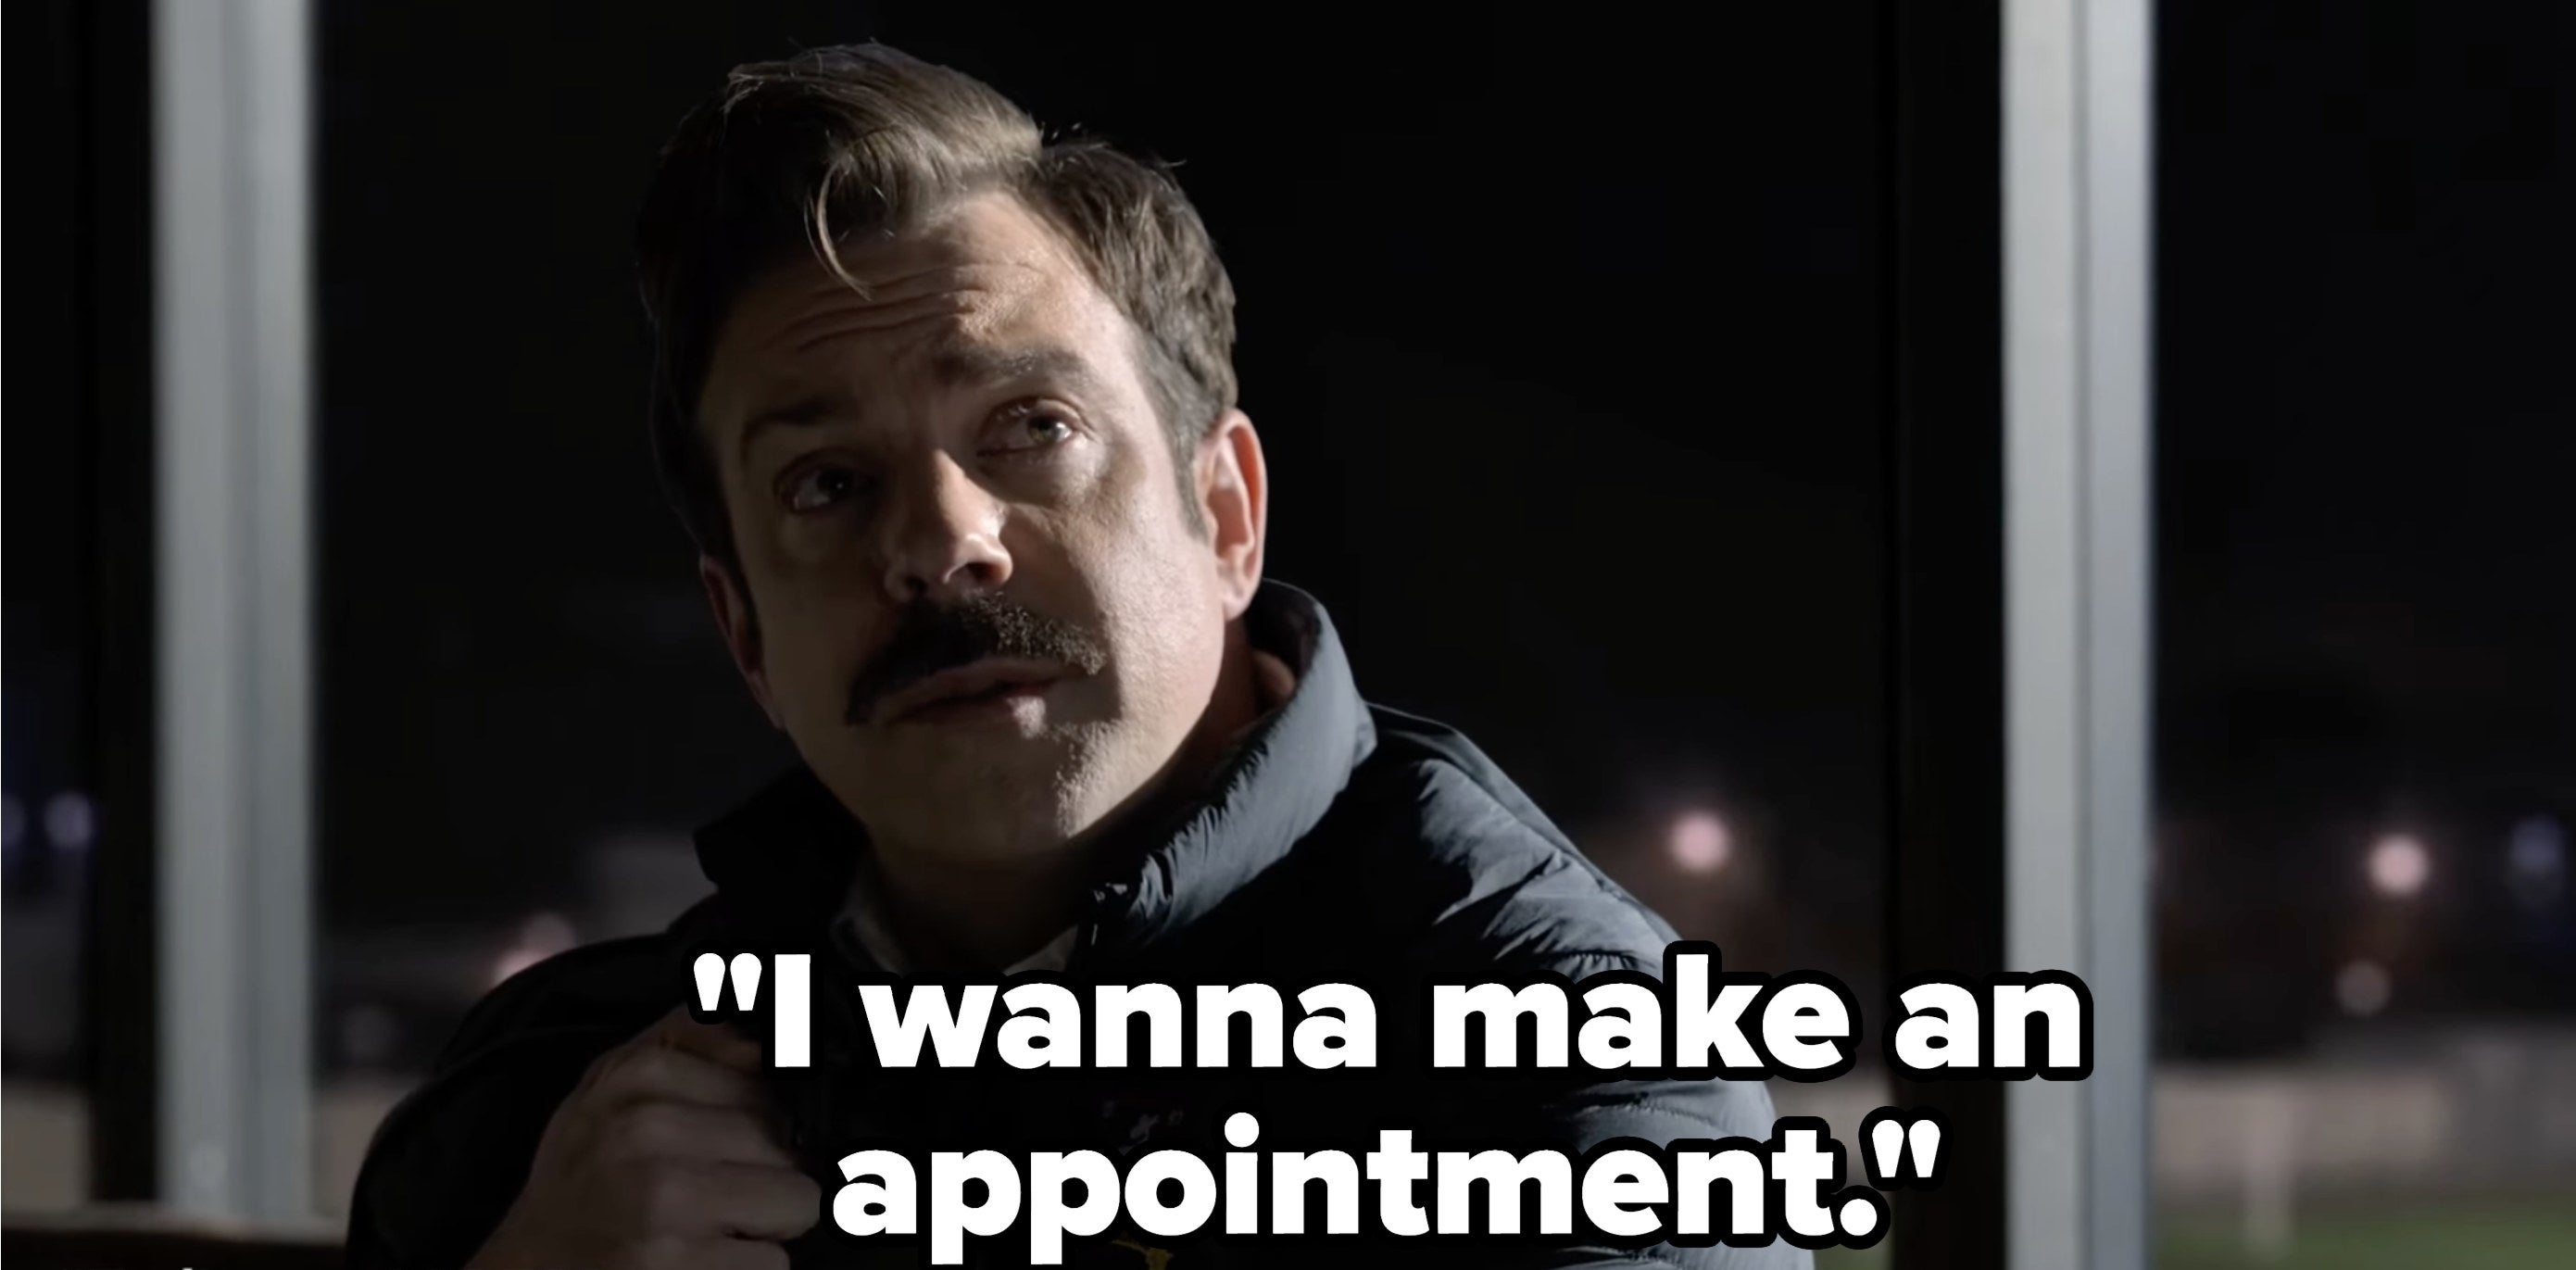 Ted saying he wants to make an appointment